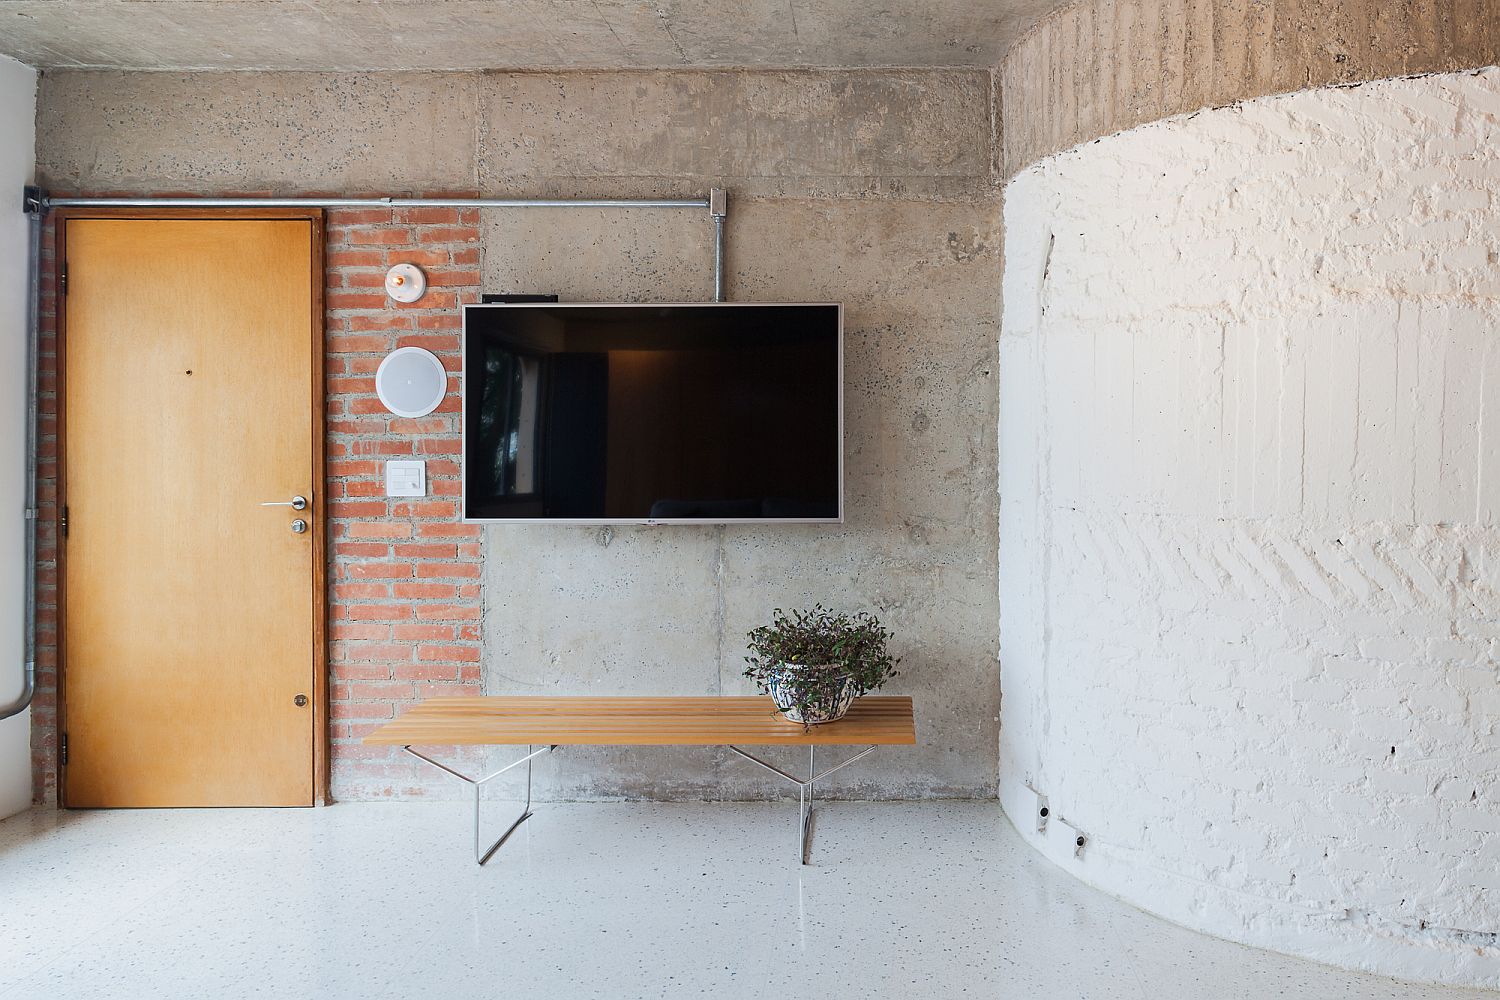 Brick-concrete-and-polished-modern-finishes-combine-inside-the-Sao-Paulo-apartment